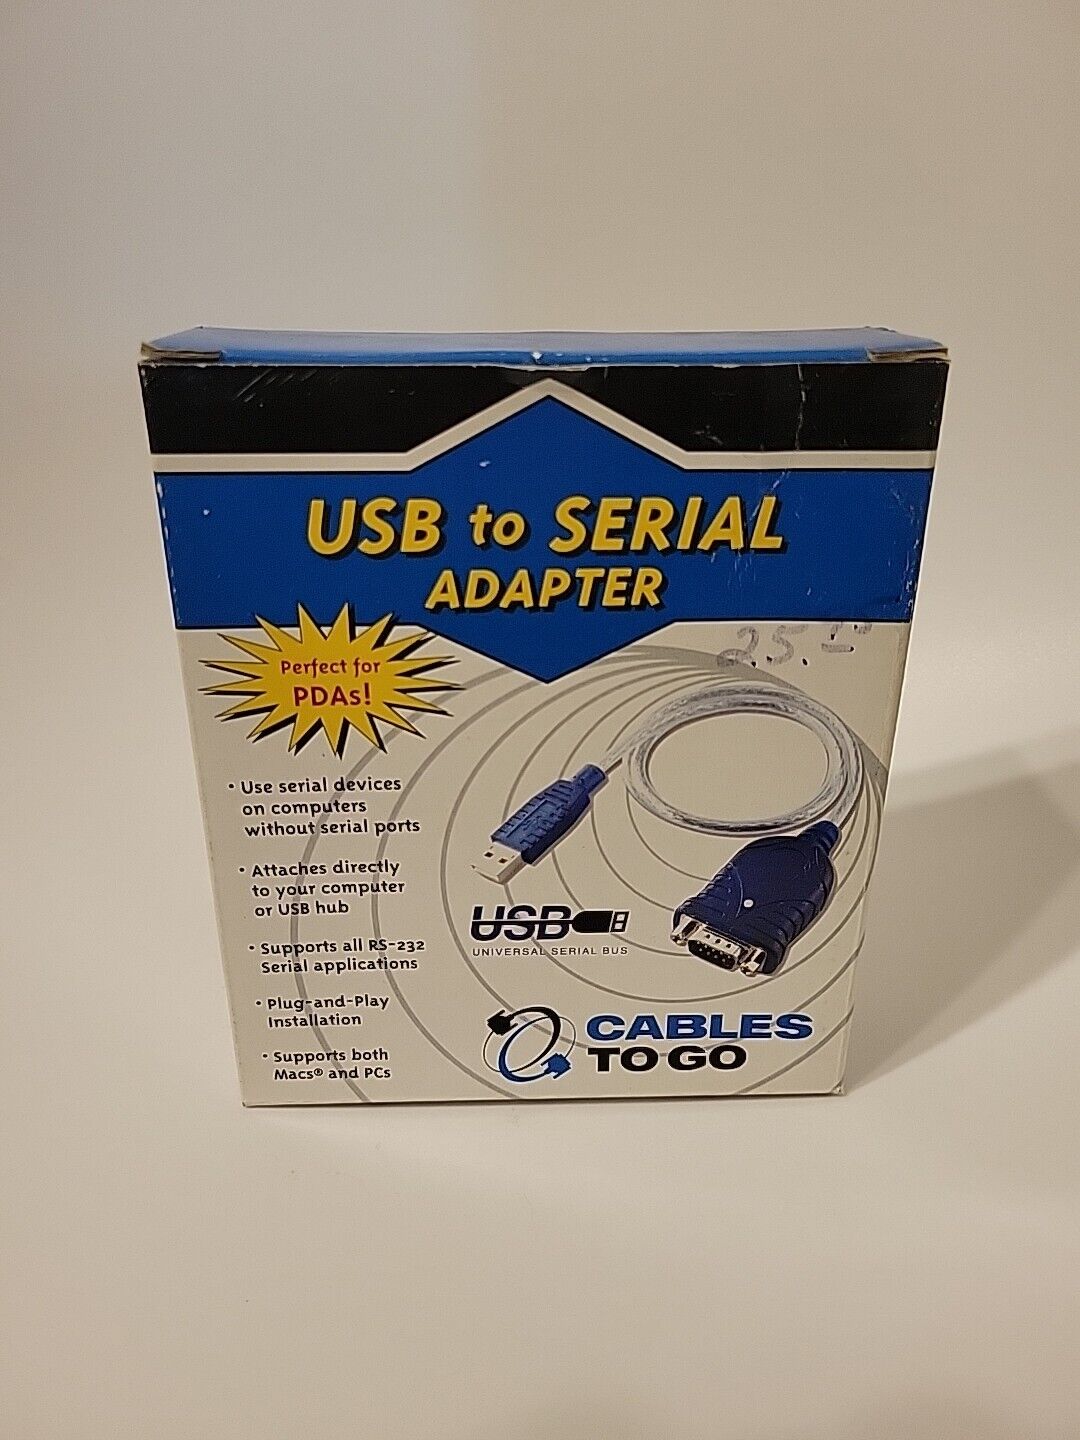 Cables to Go USB to serial adapter - new in box 